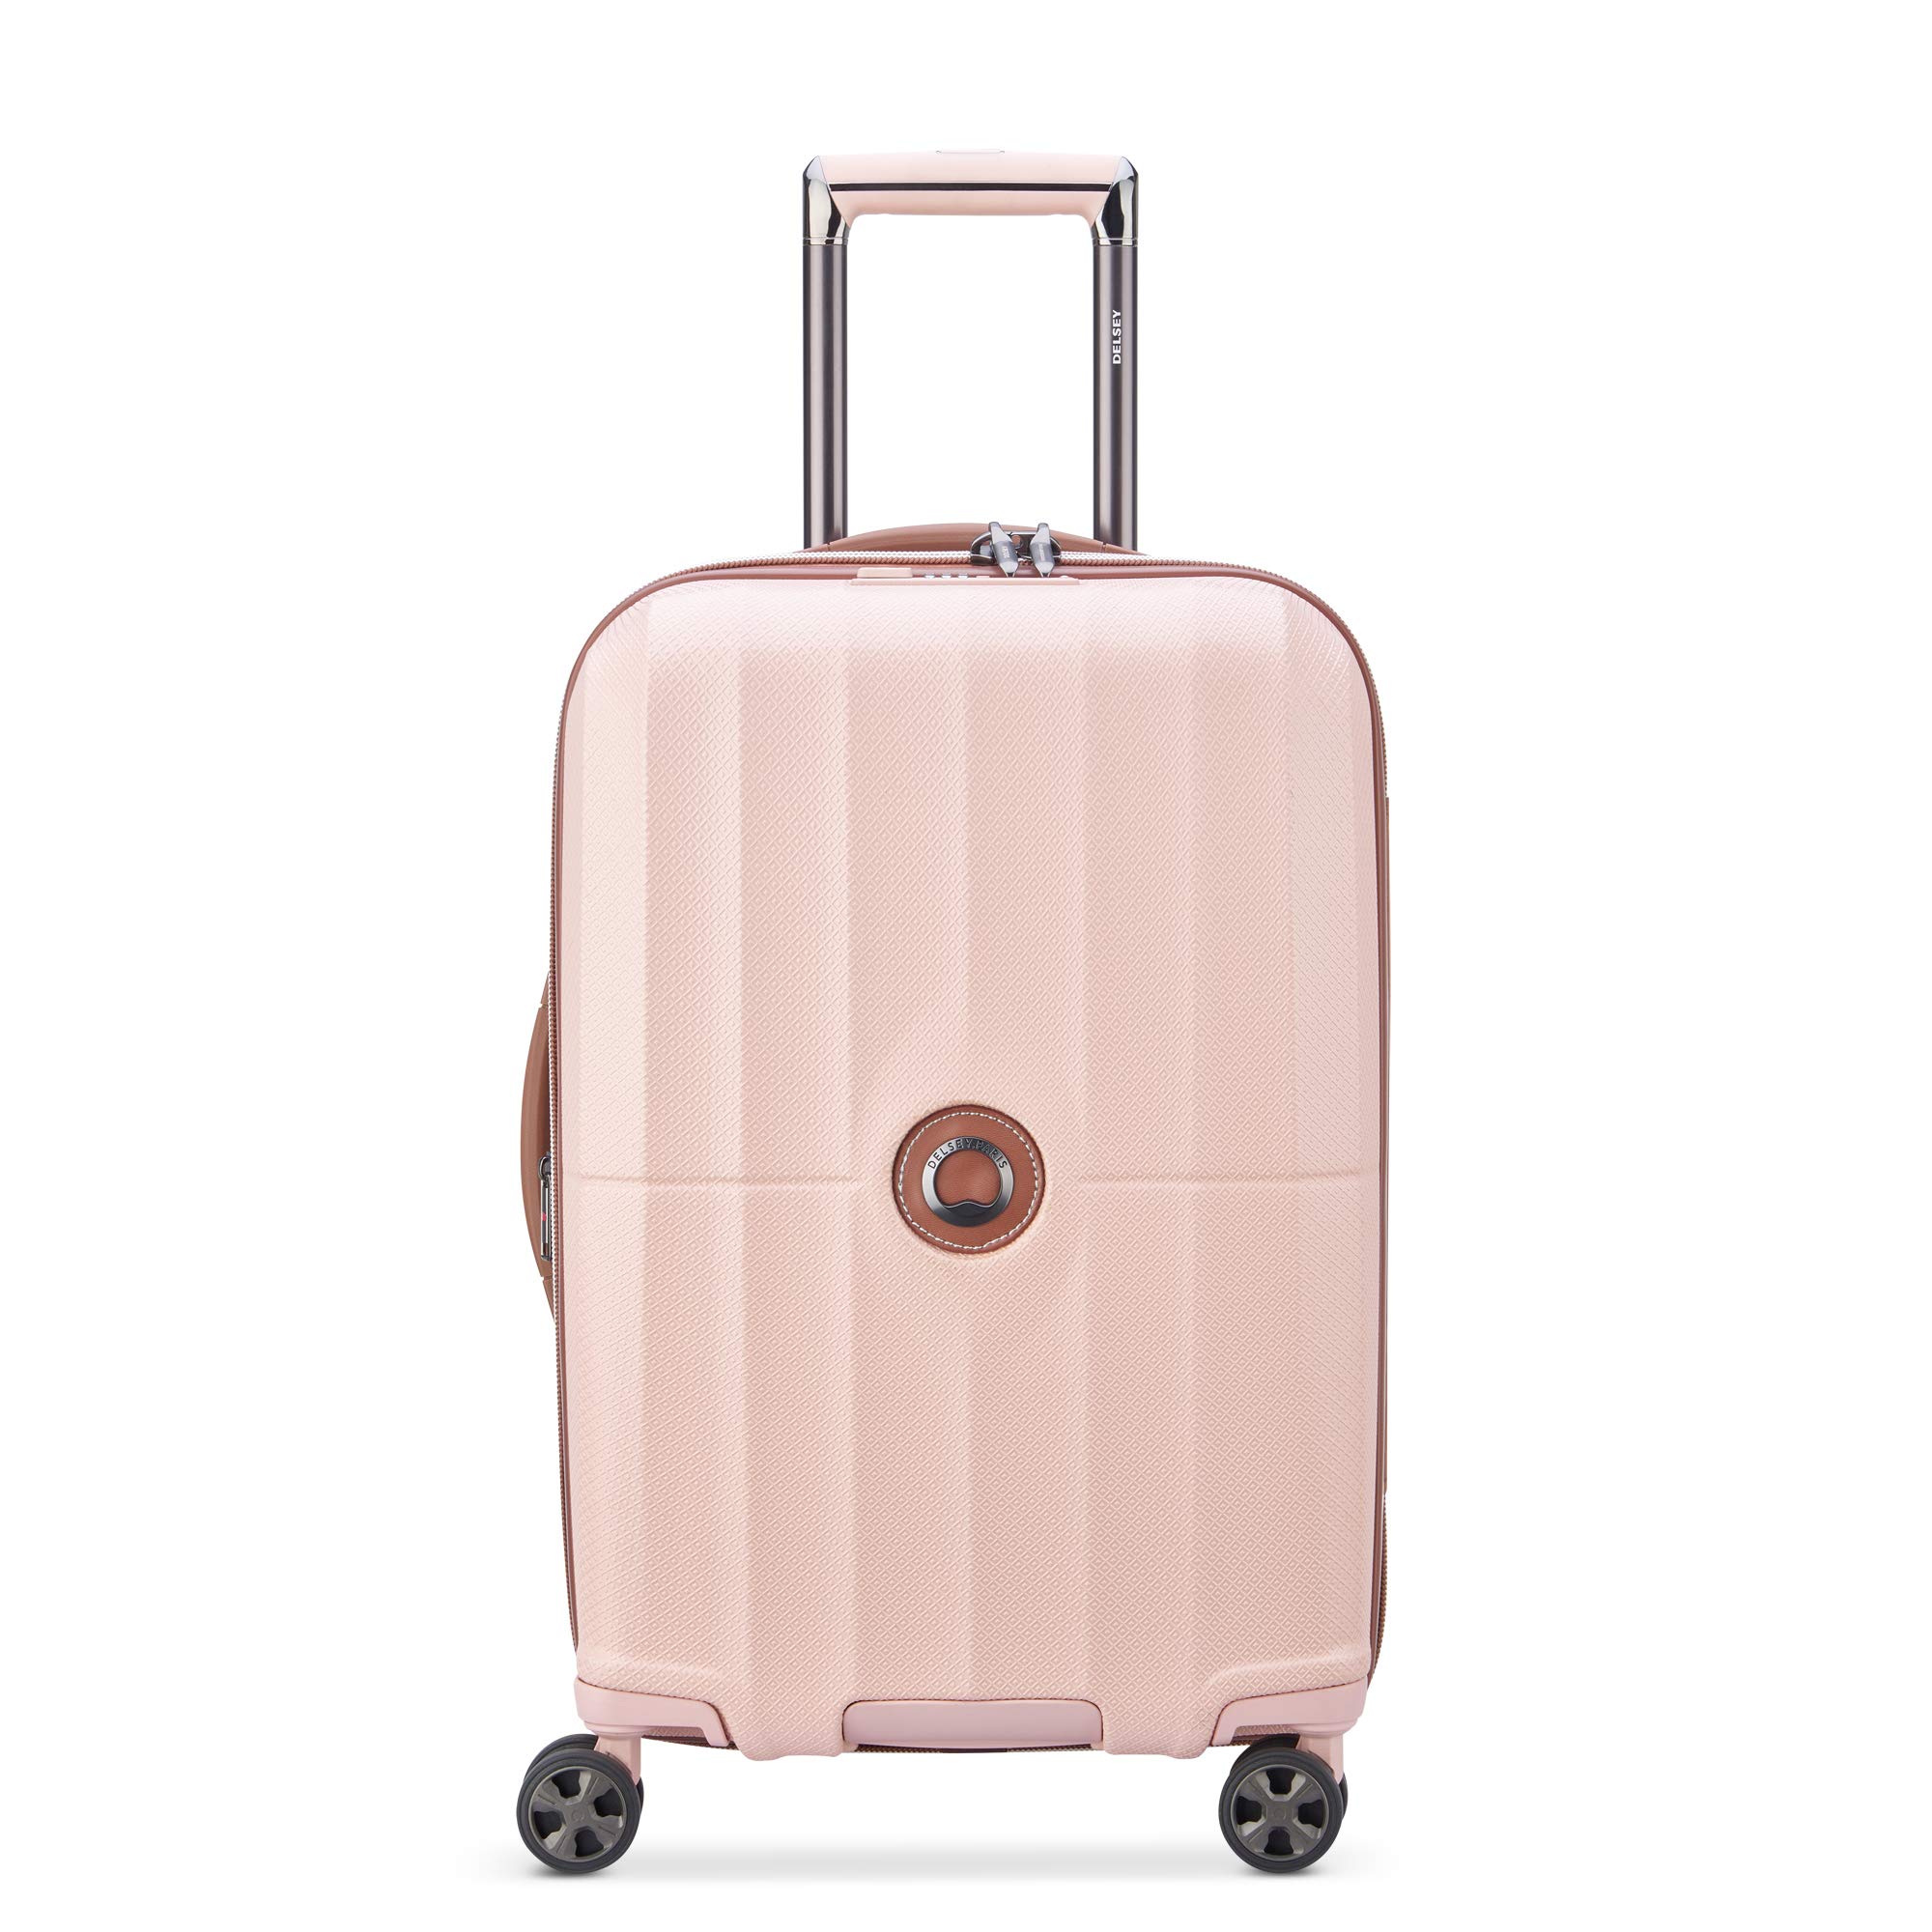 DELSEY Paris St Tropez Hardside Expandable Luggage with Spinner Wheels, Pink, carry-on 21 Inch